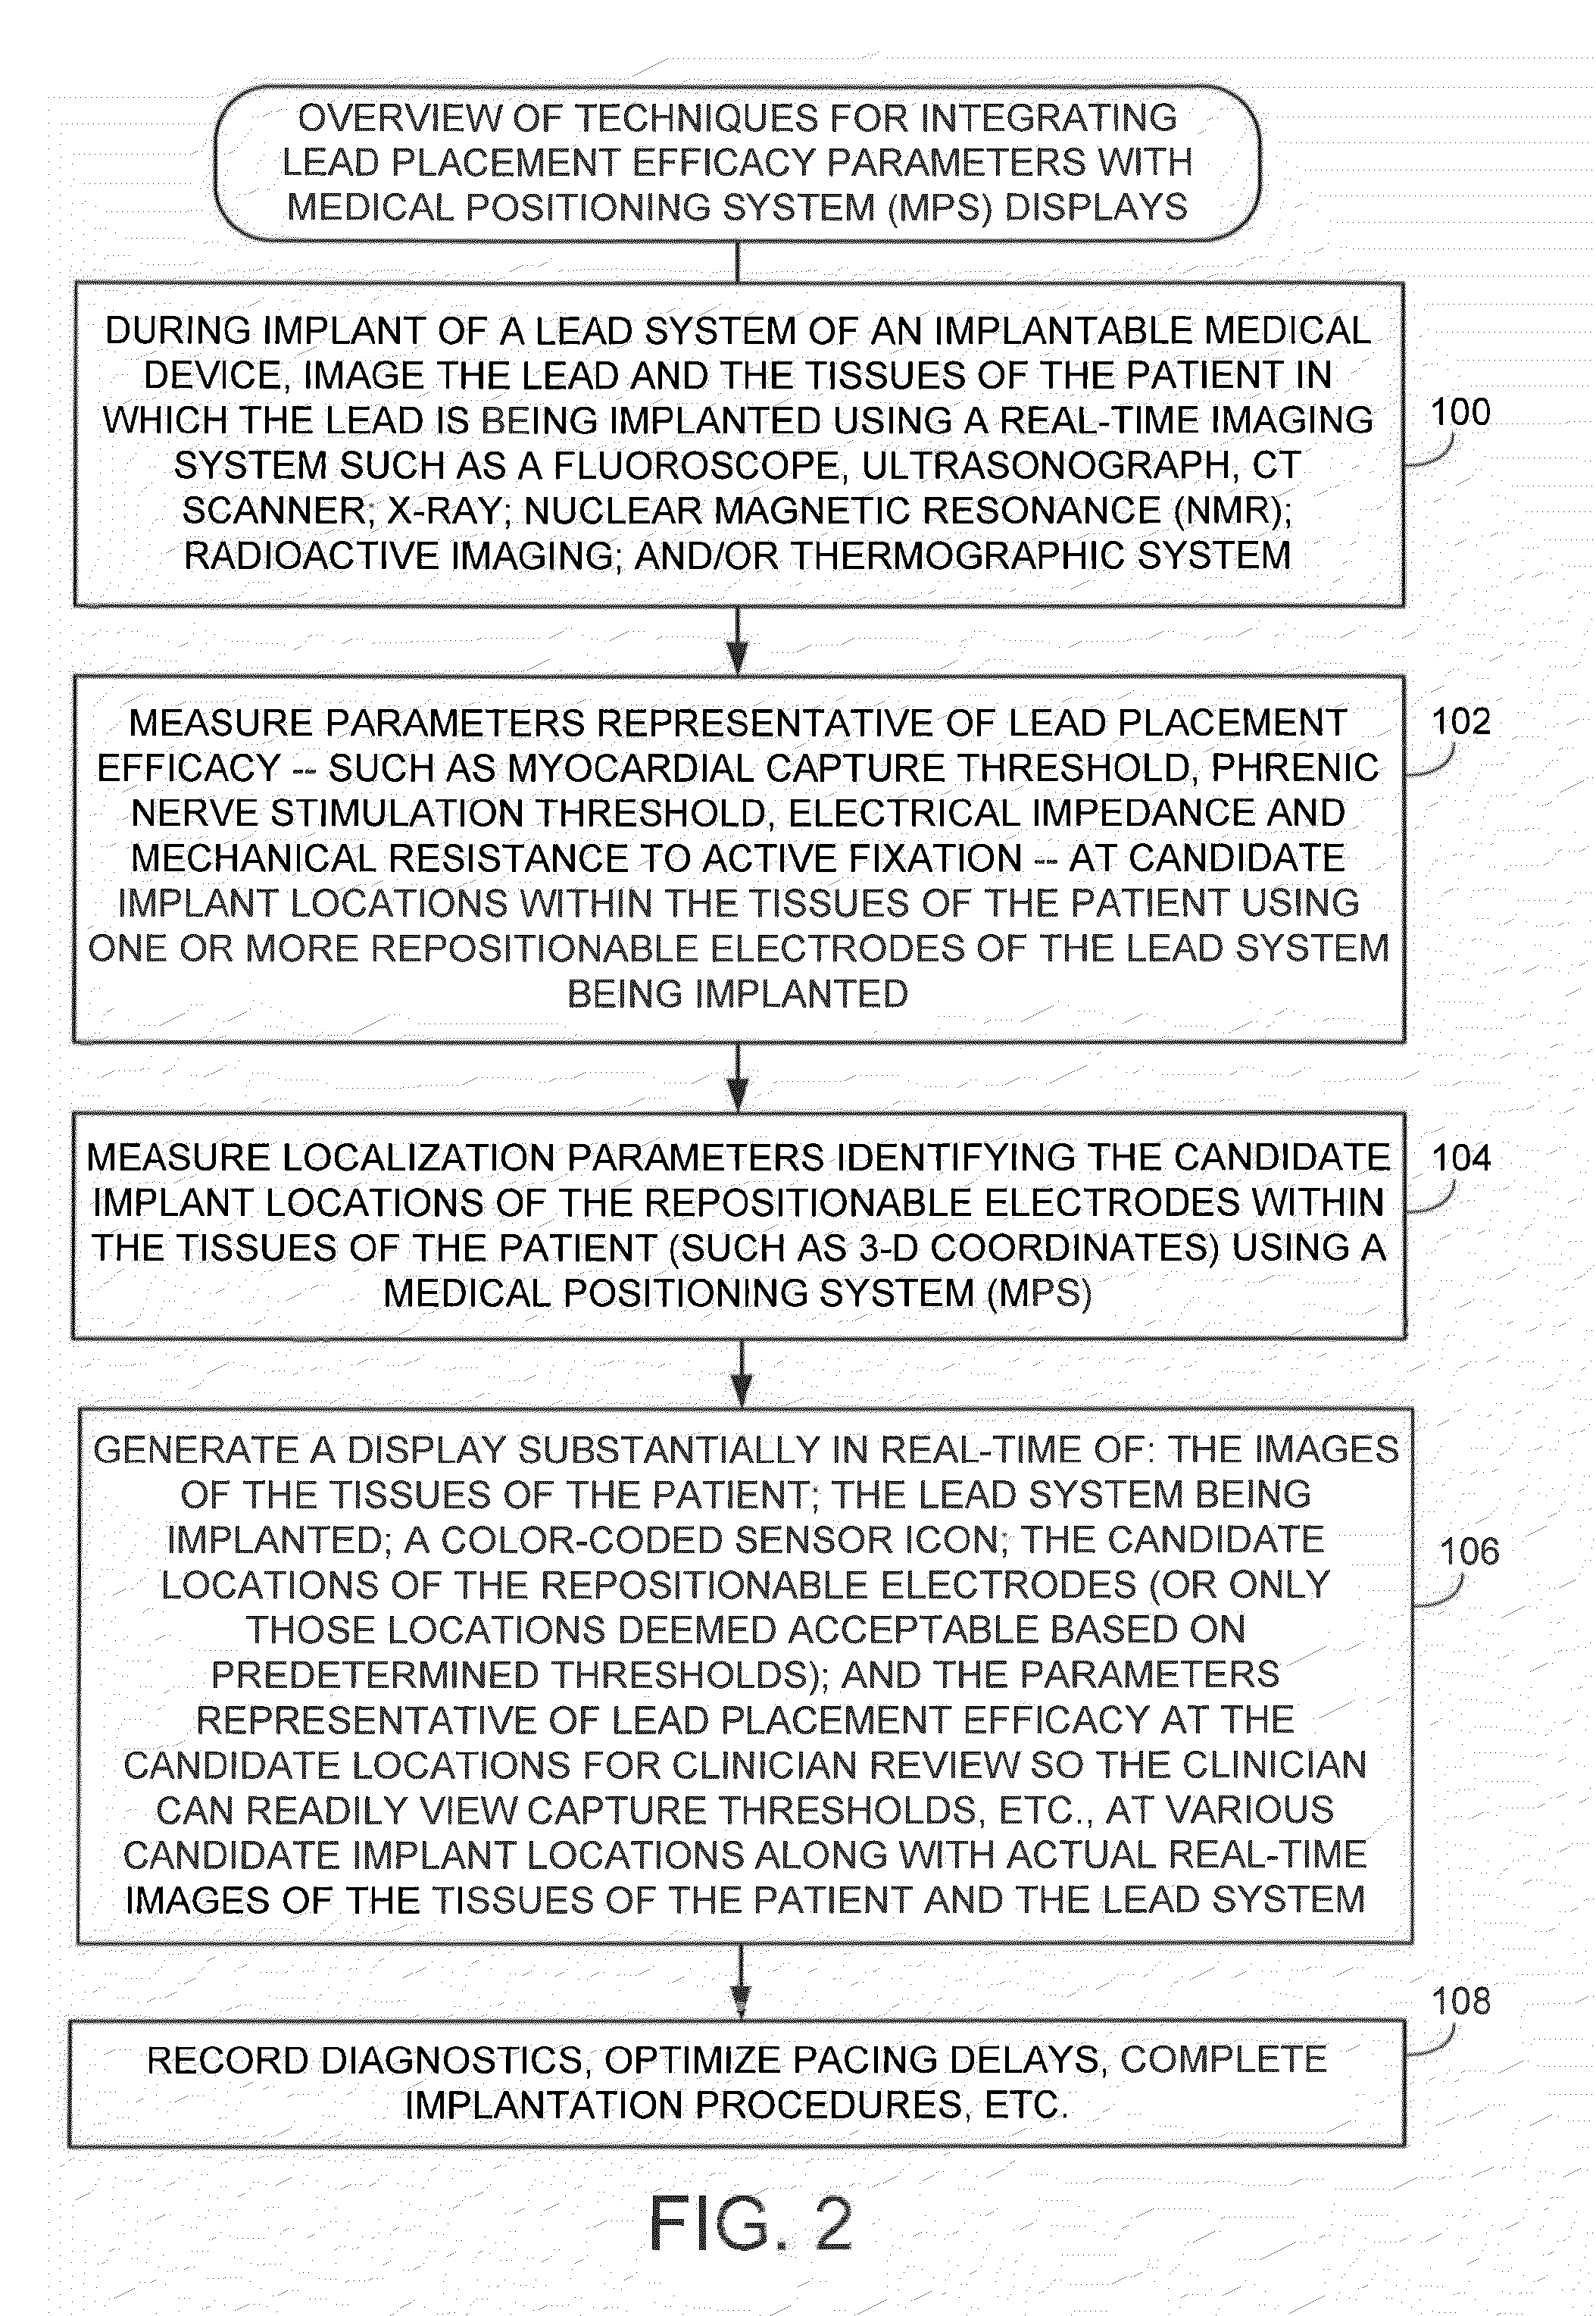 System and method for integrating candidate implant location test results with real-time tissue images for use with implantable device leads